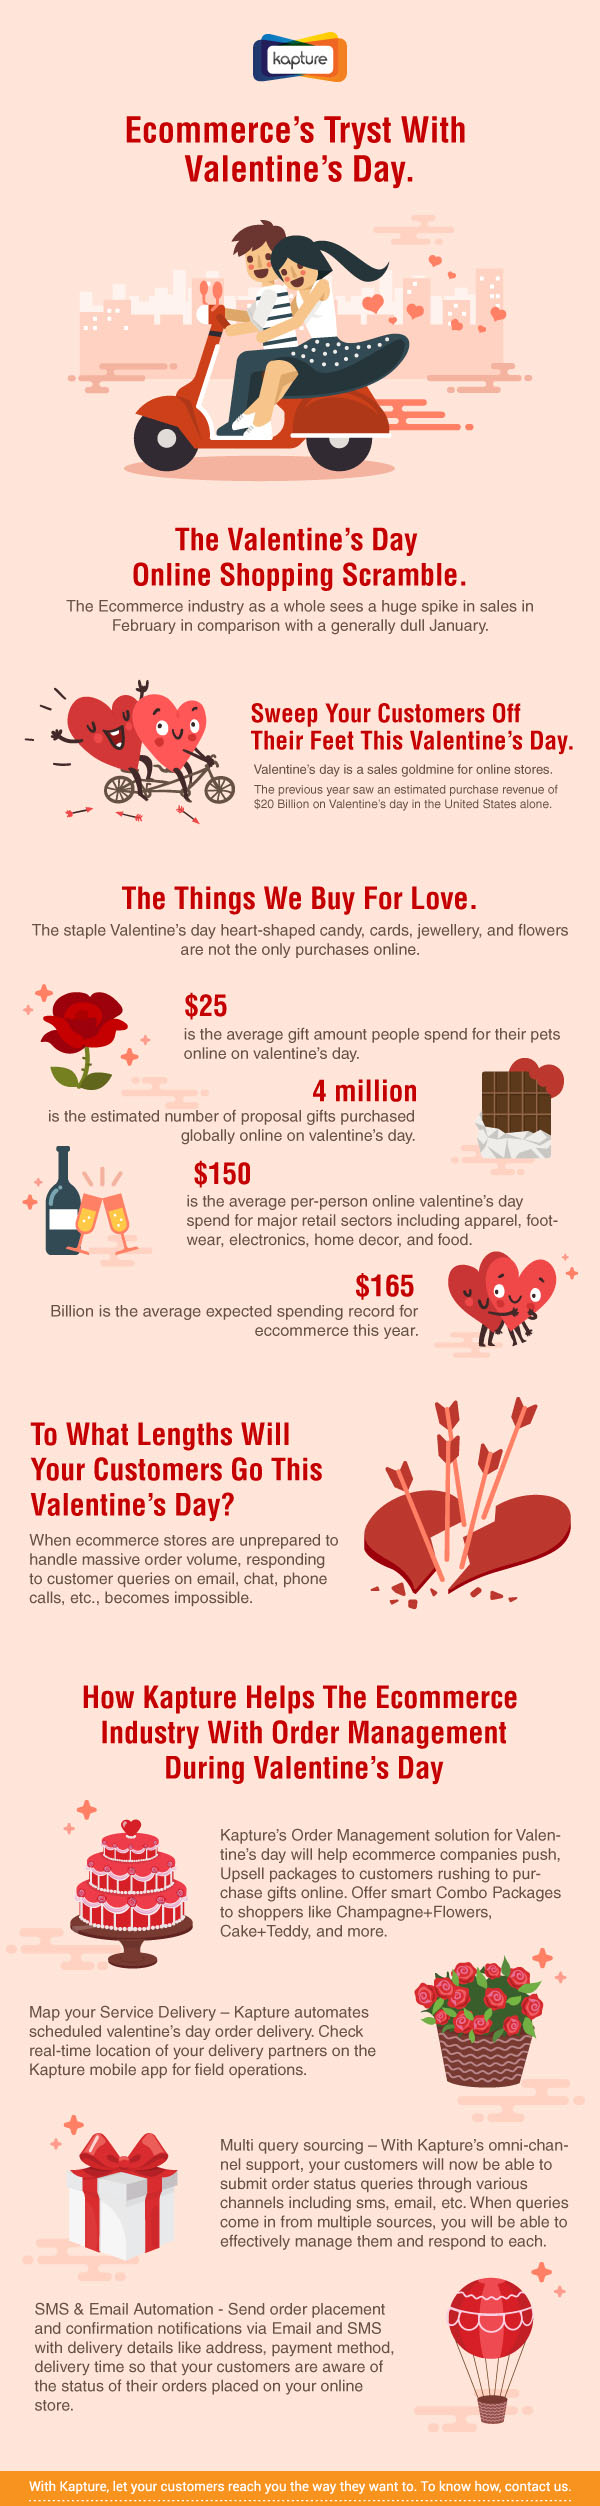 Ecommerce stores need to be well prepared to handle high order volume on Valentine's Day. Kapture Order Management helps v-day upselling, delivery automation, and multi-query handling. This infographic has all the info.